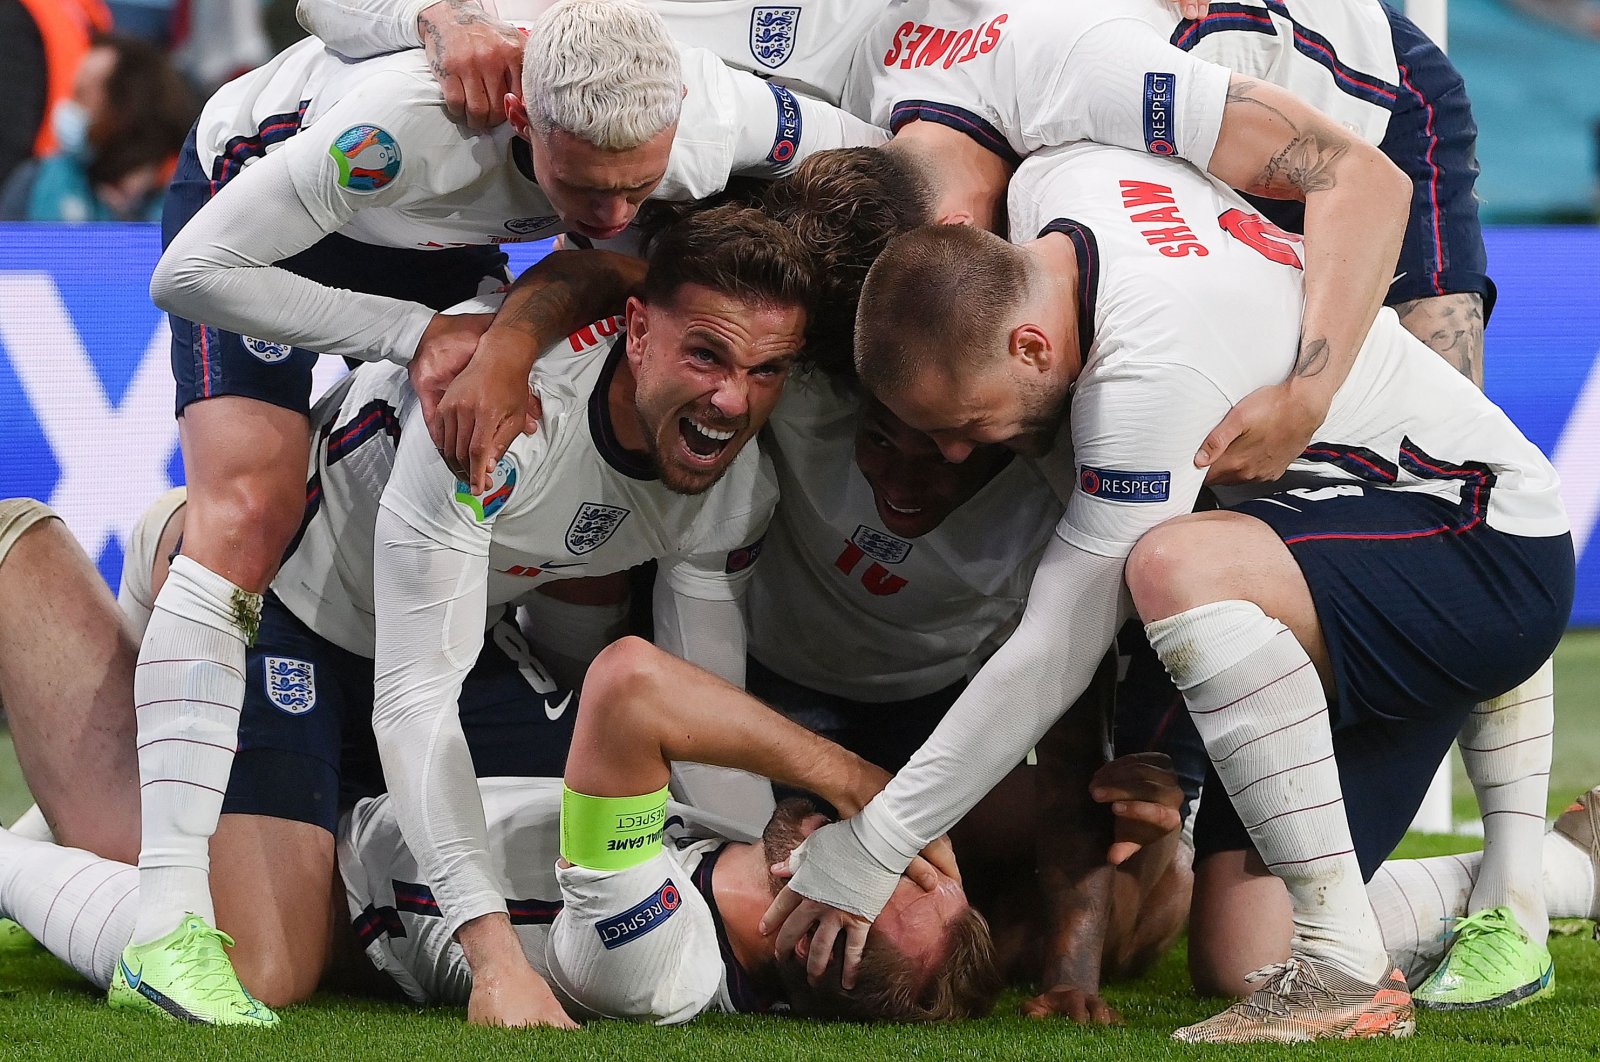 England's forward Harry Kane (bottom) celebrates with teammates after scoring a goal during the UEFA EURO 2020 semifinal football match between England and Denmark at Wembley Stadium in London, July 7, 2021. (AFP Photo)